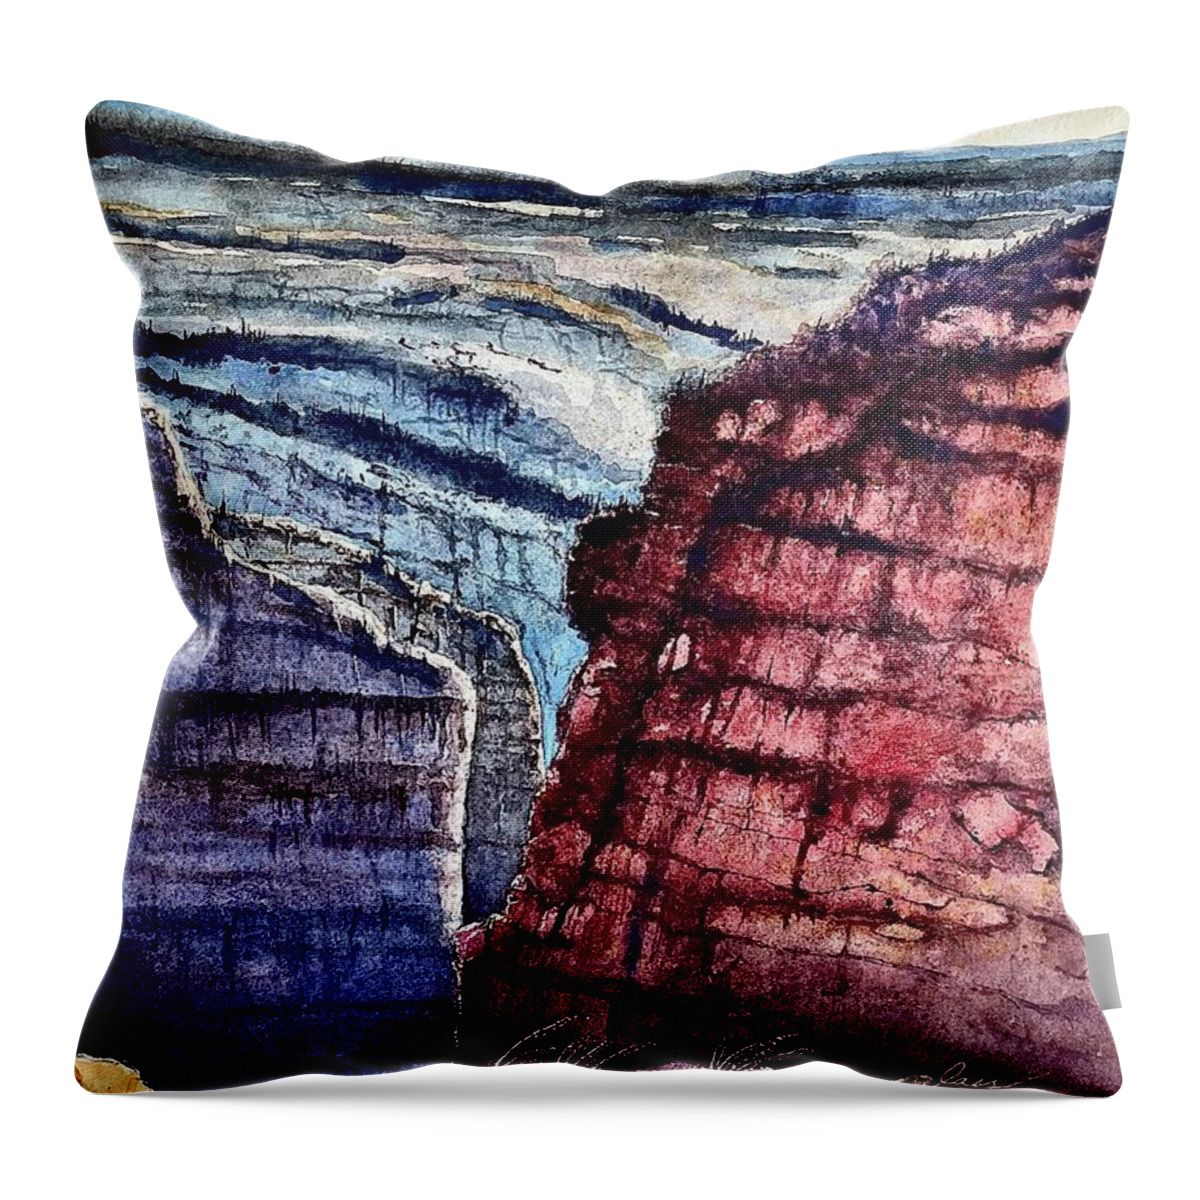 What A Place. Huge Throw Pillow featuring the painting Morning at Canyon de Chelly by John Glass